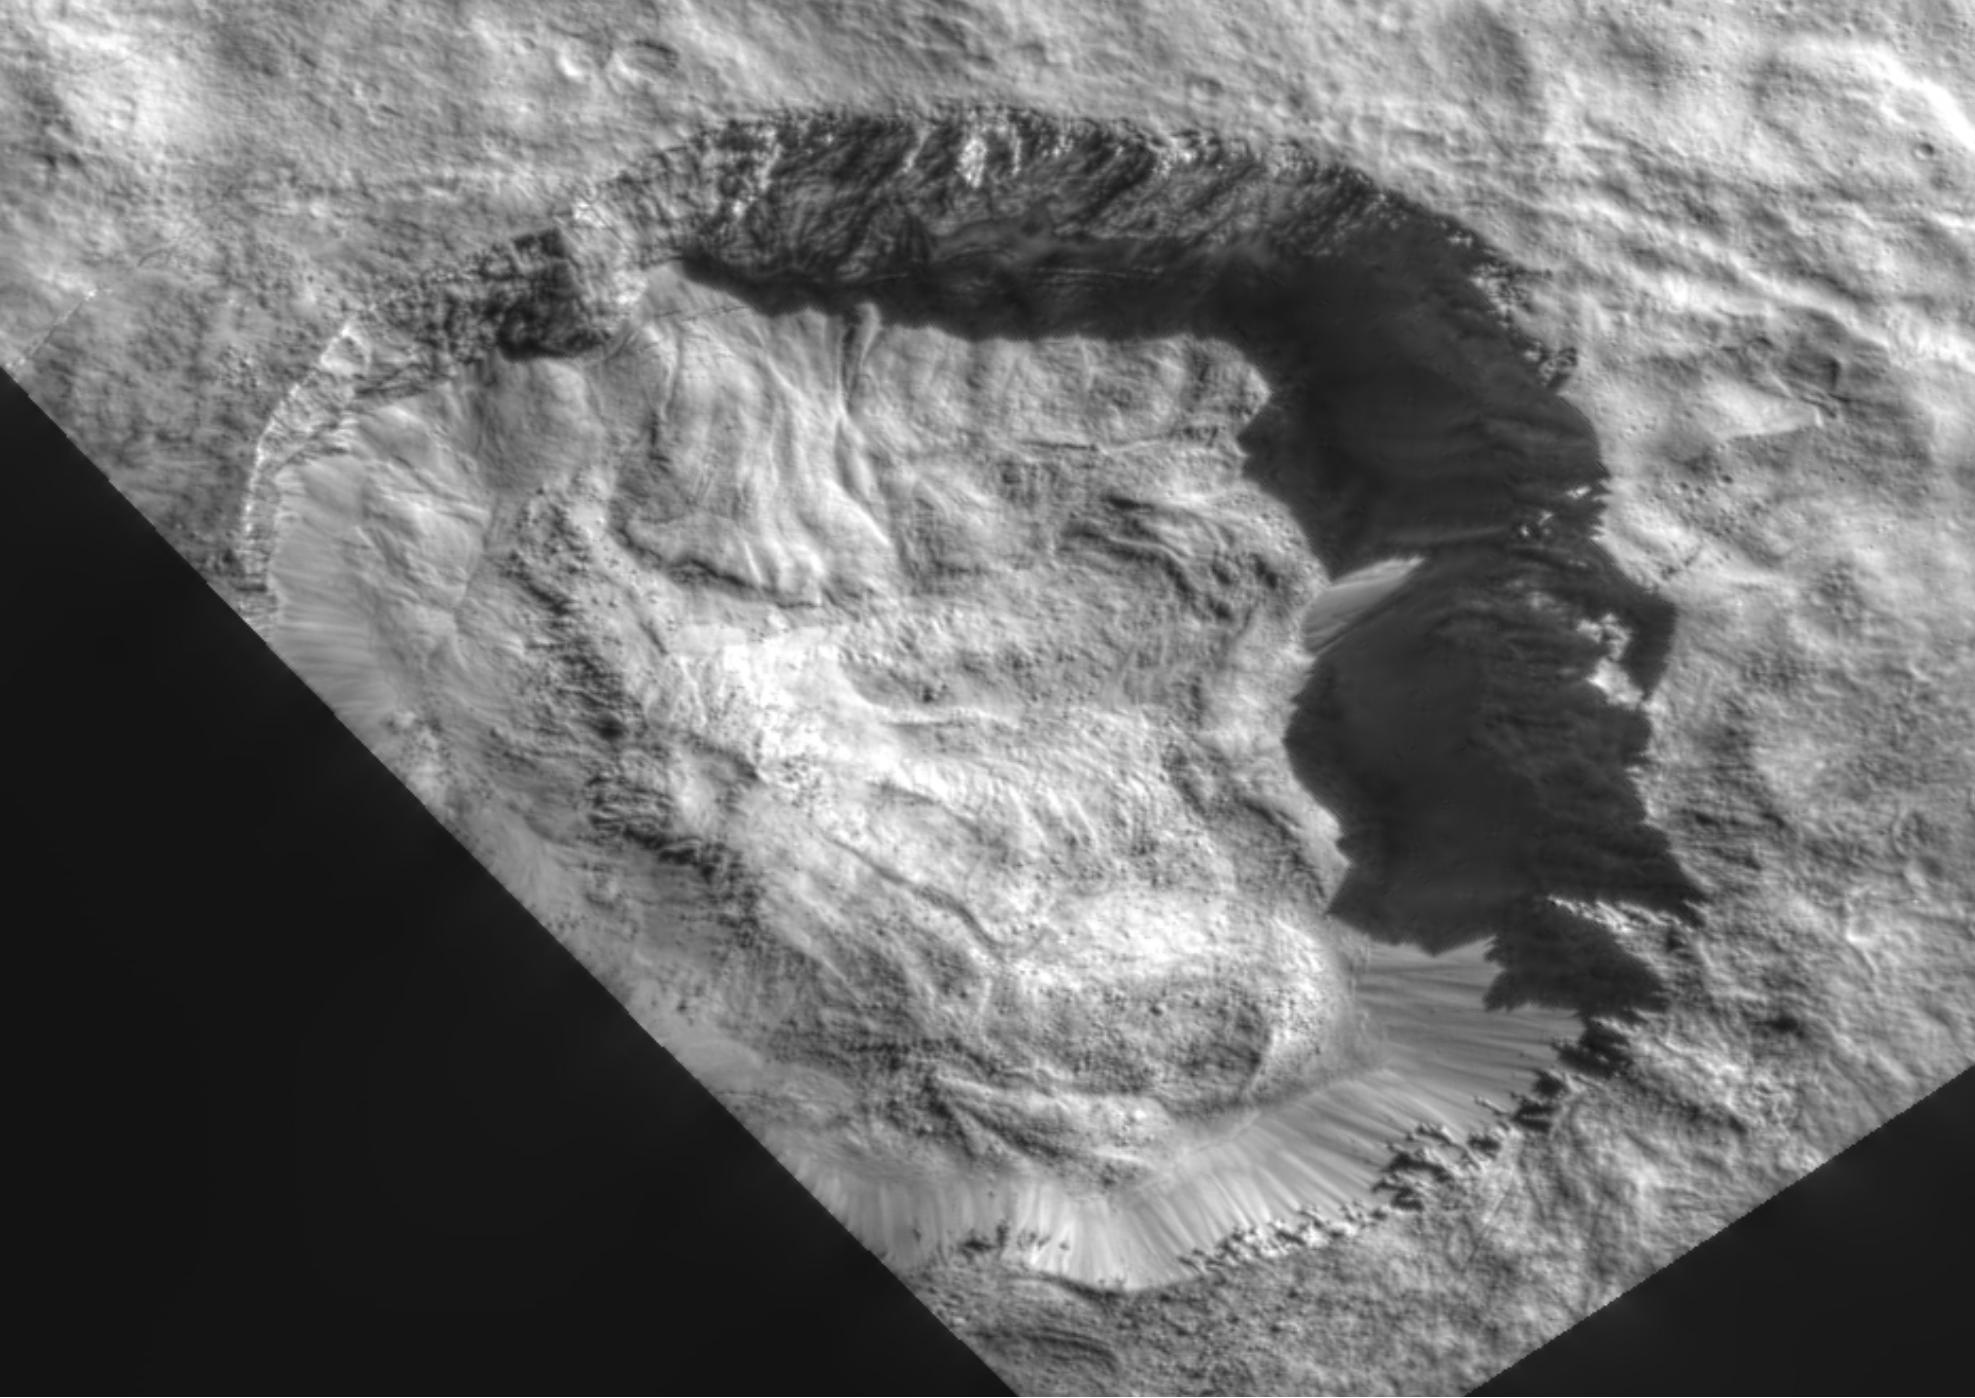 Detailed view of large impact crater on Ceres